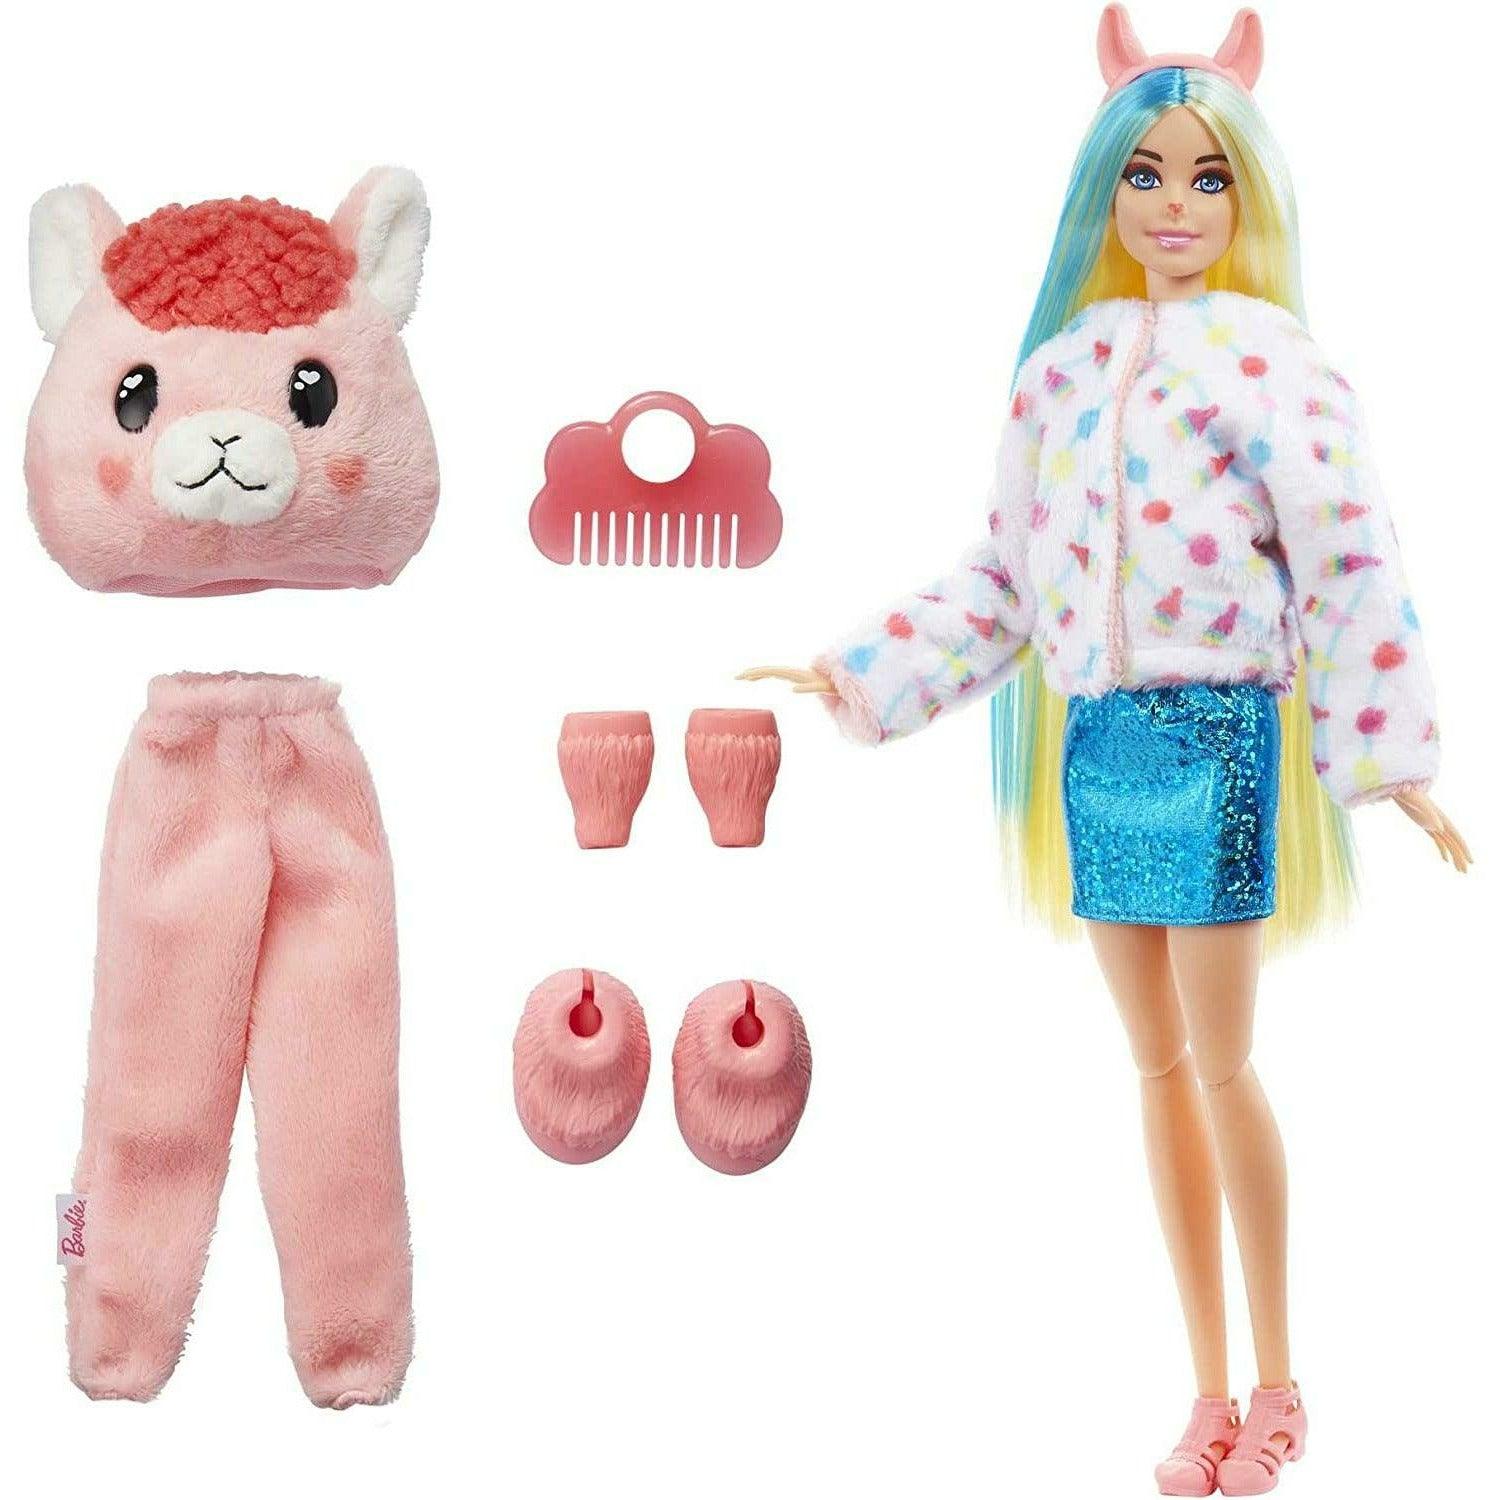 Barbie Cutie Reveal Fantasy Series Doll With Llama Plush Costume & 10 Surprises Including Mini Pet & Color Change - BumbleToys - 5-7 Years, Barbie, Fashion Dolls & Accessories, Girls, OXE, Pre-Order